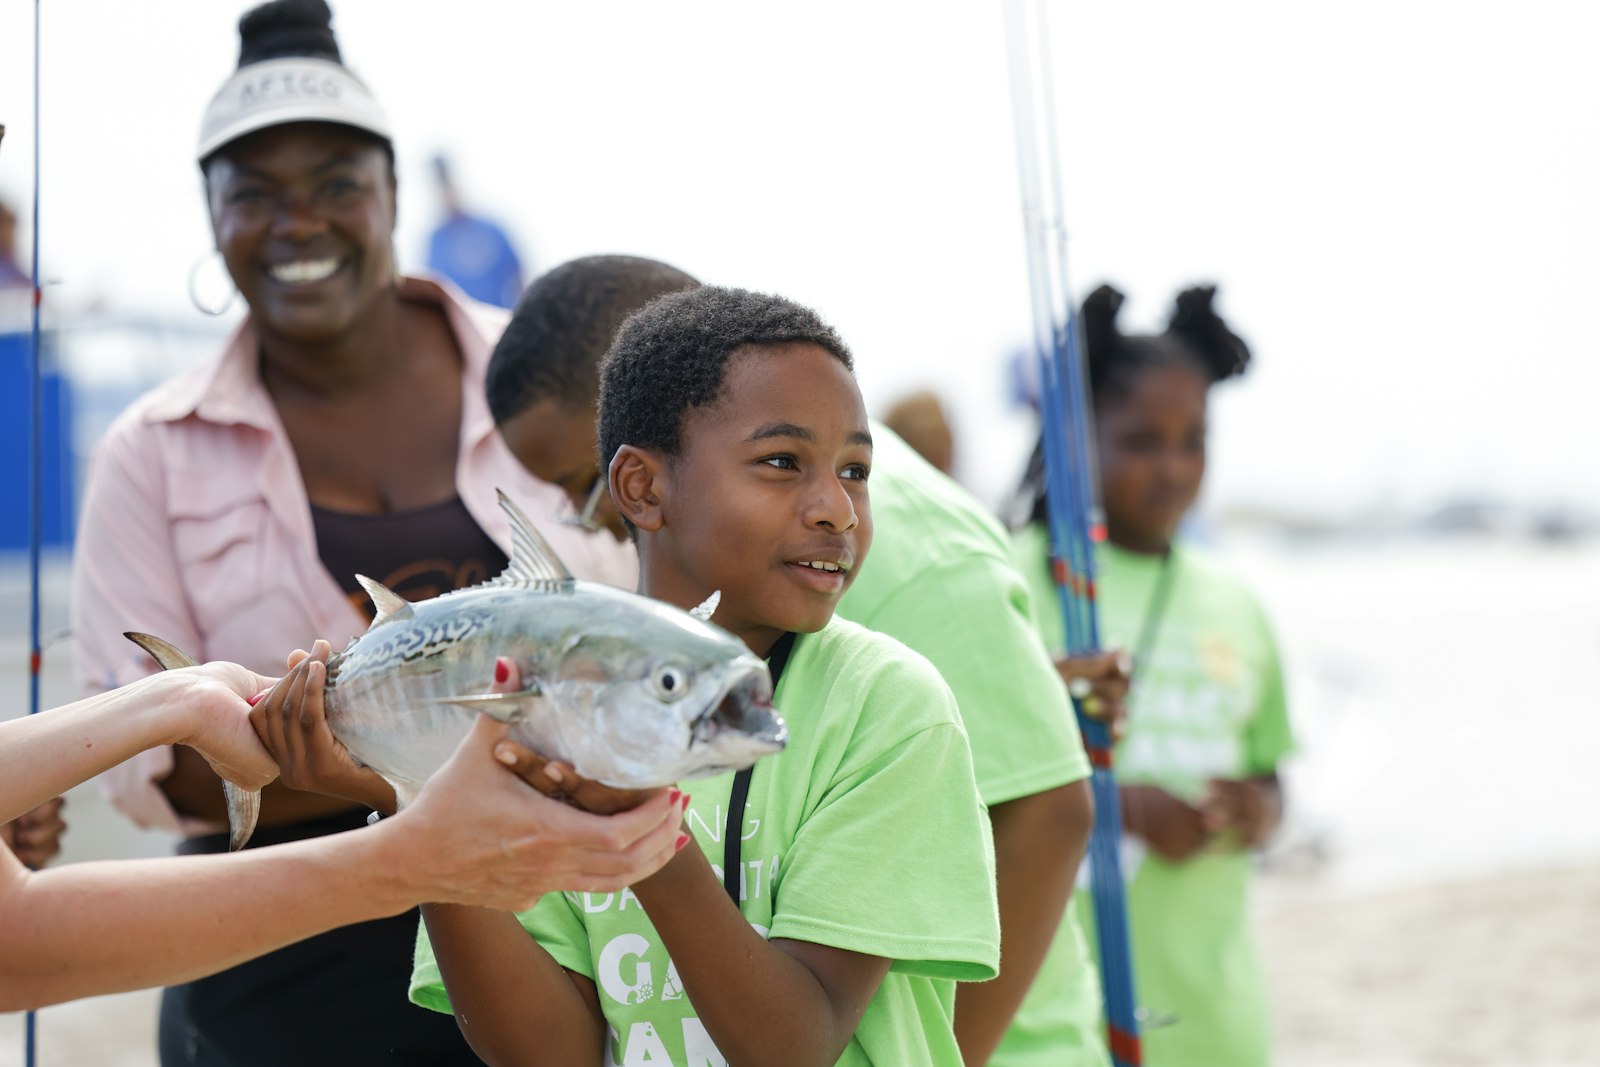 Let's go fishing! Youth Fishing Programs for Disabled Children